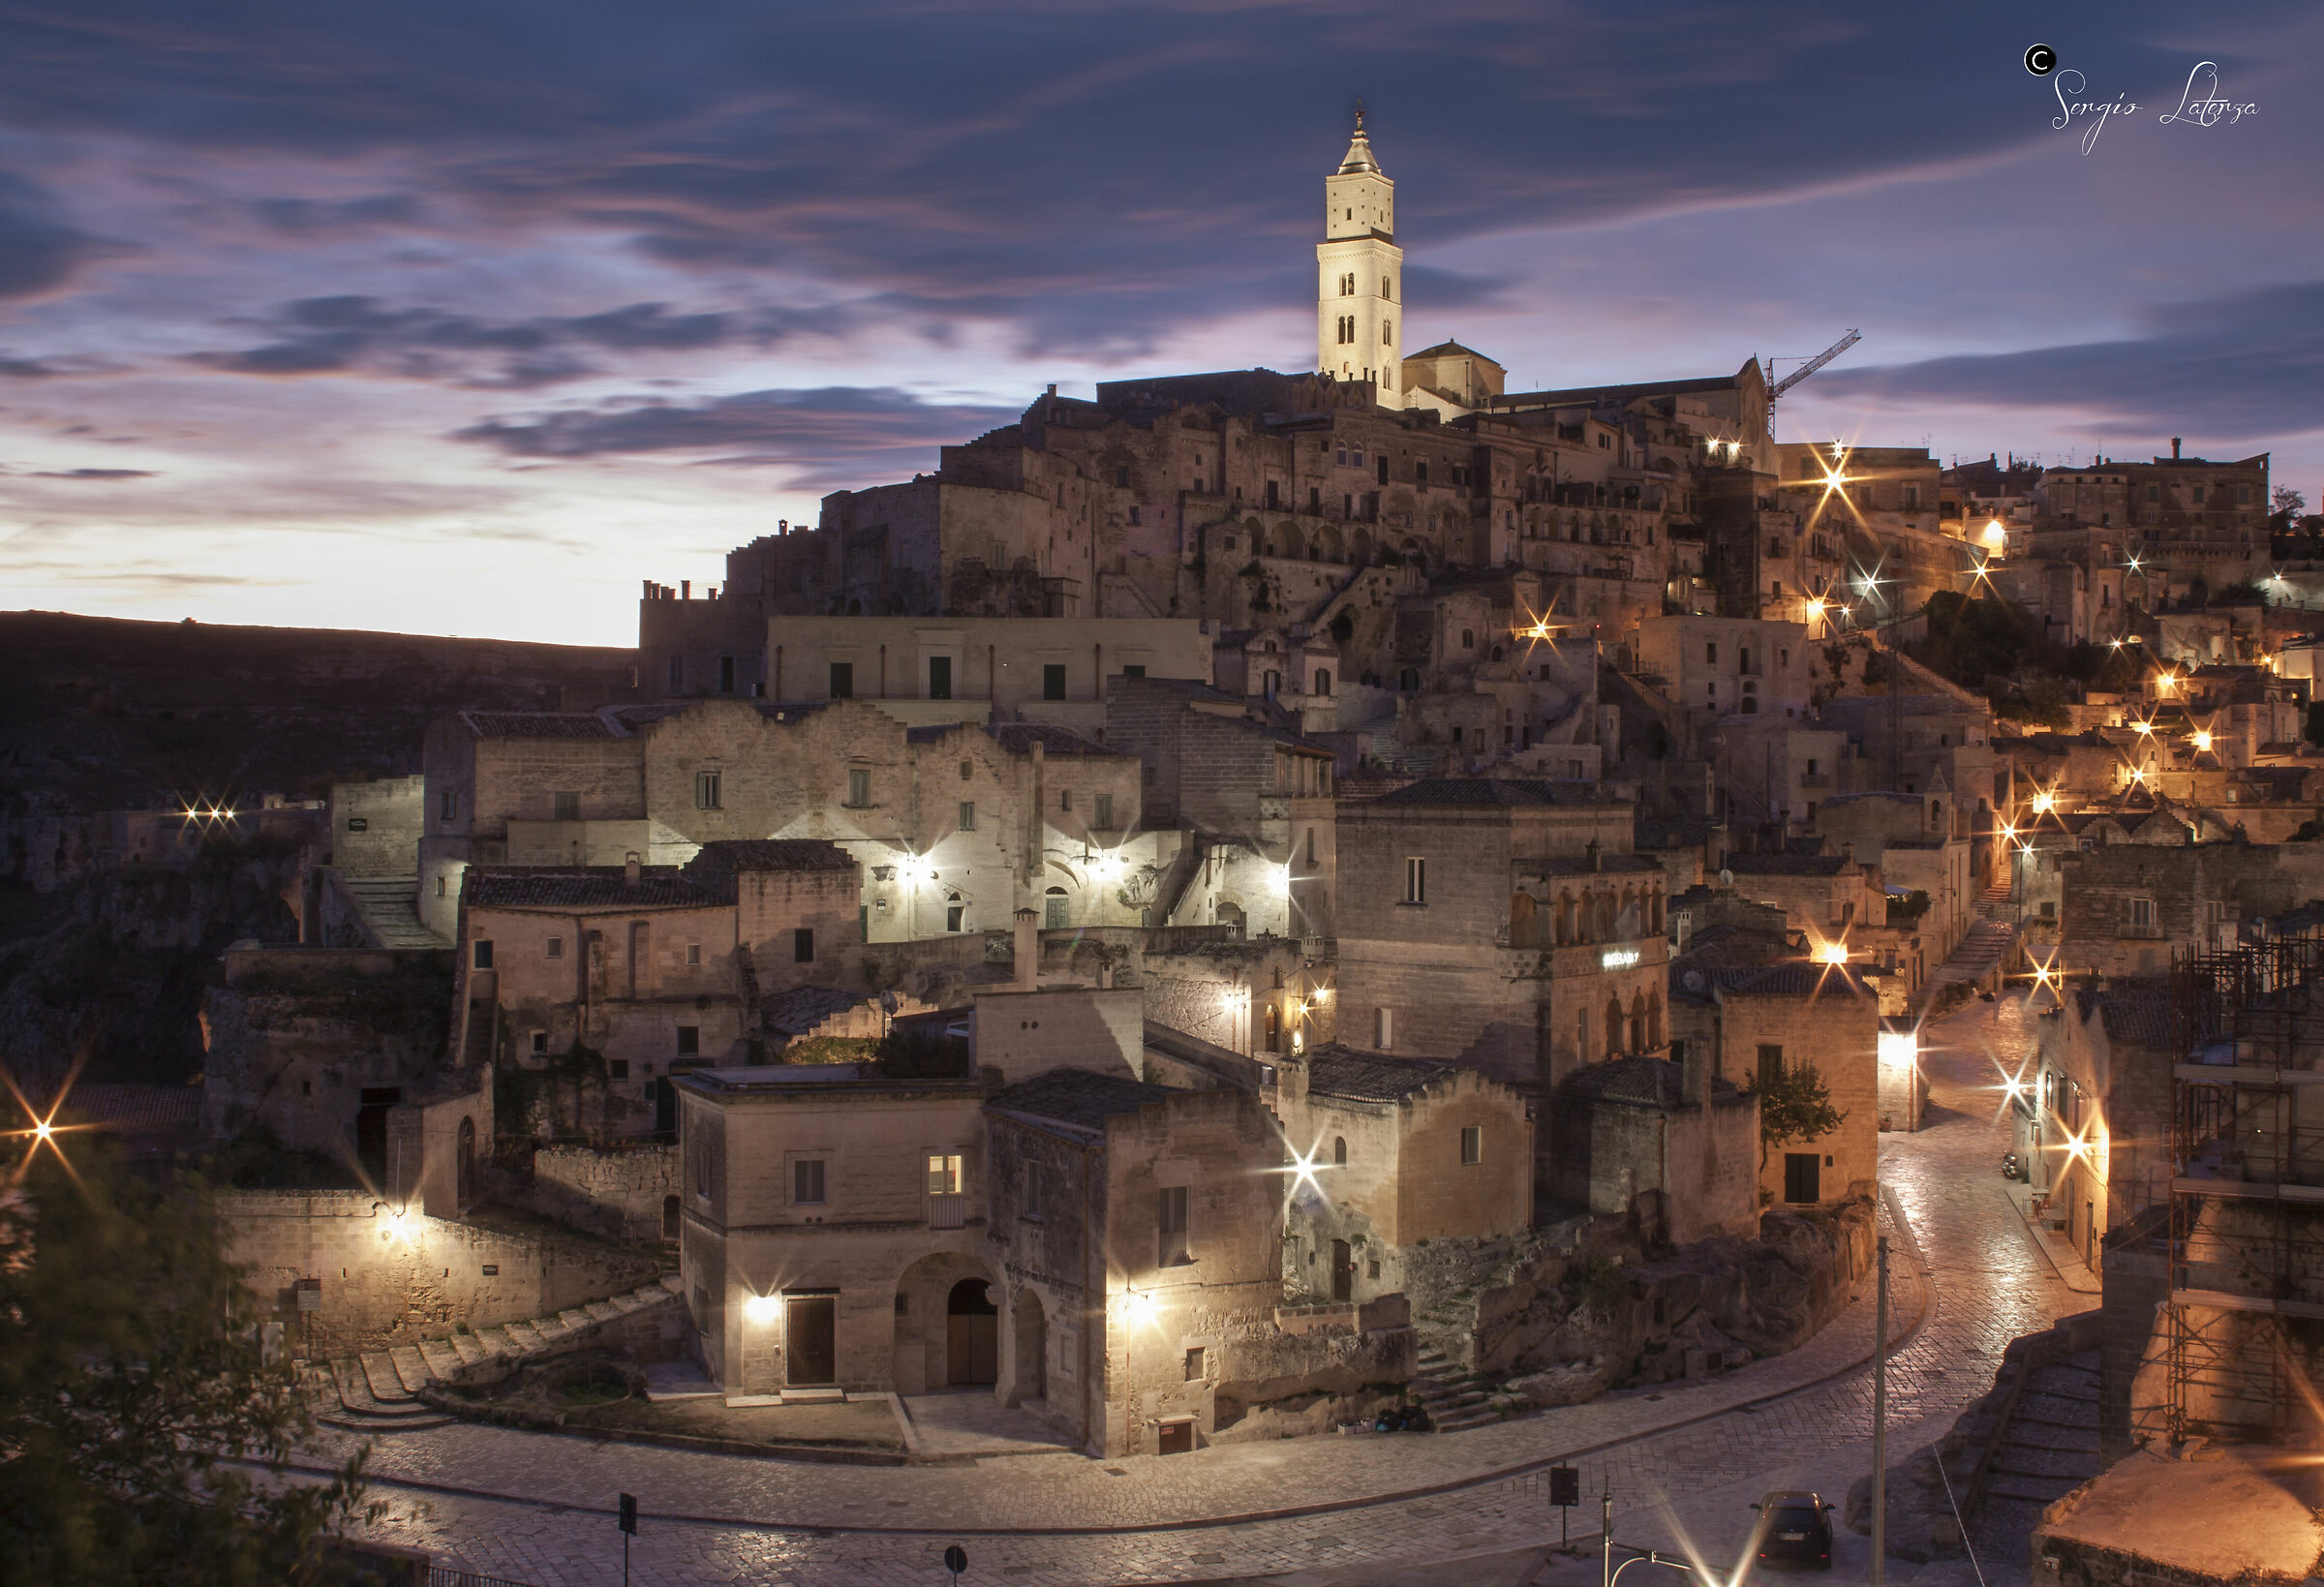 Matera is lovely......